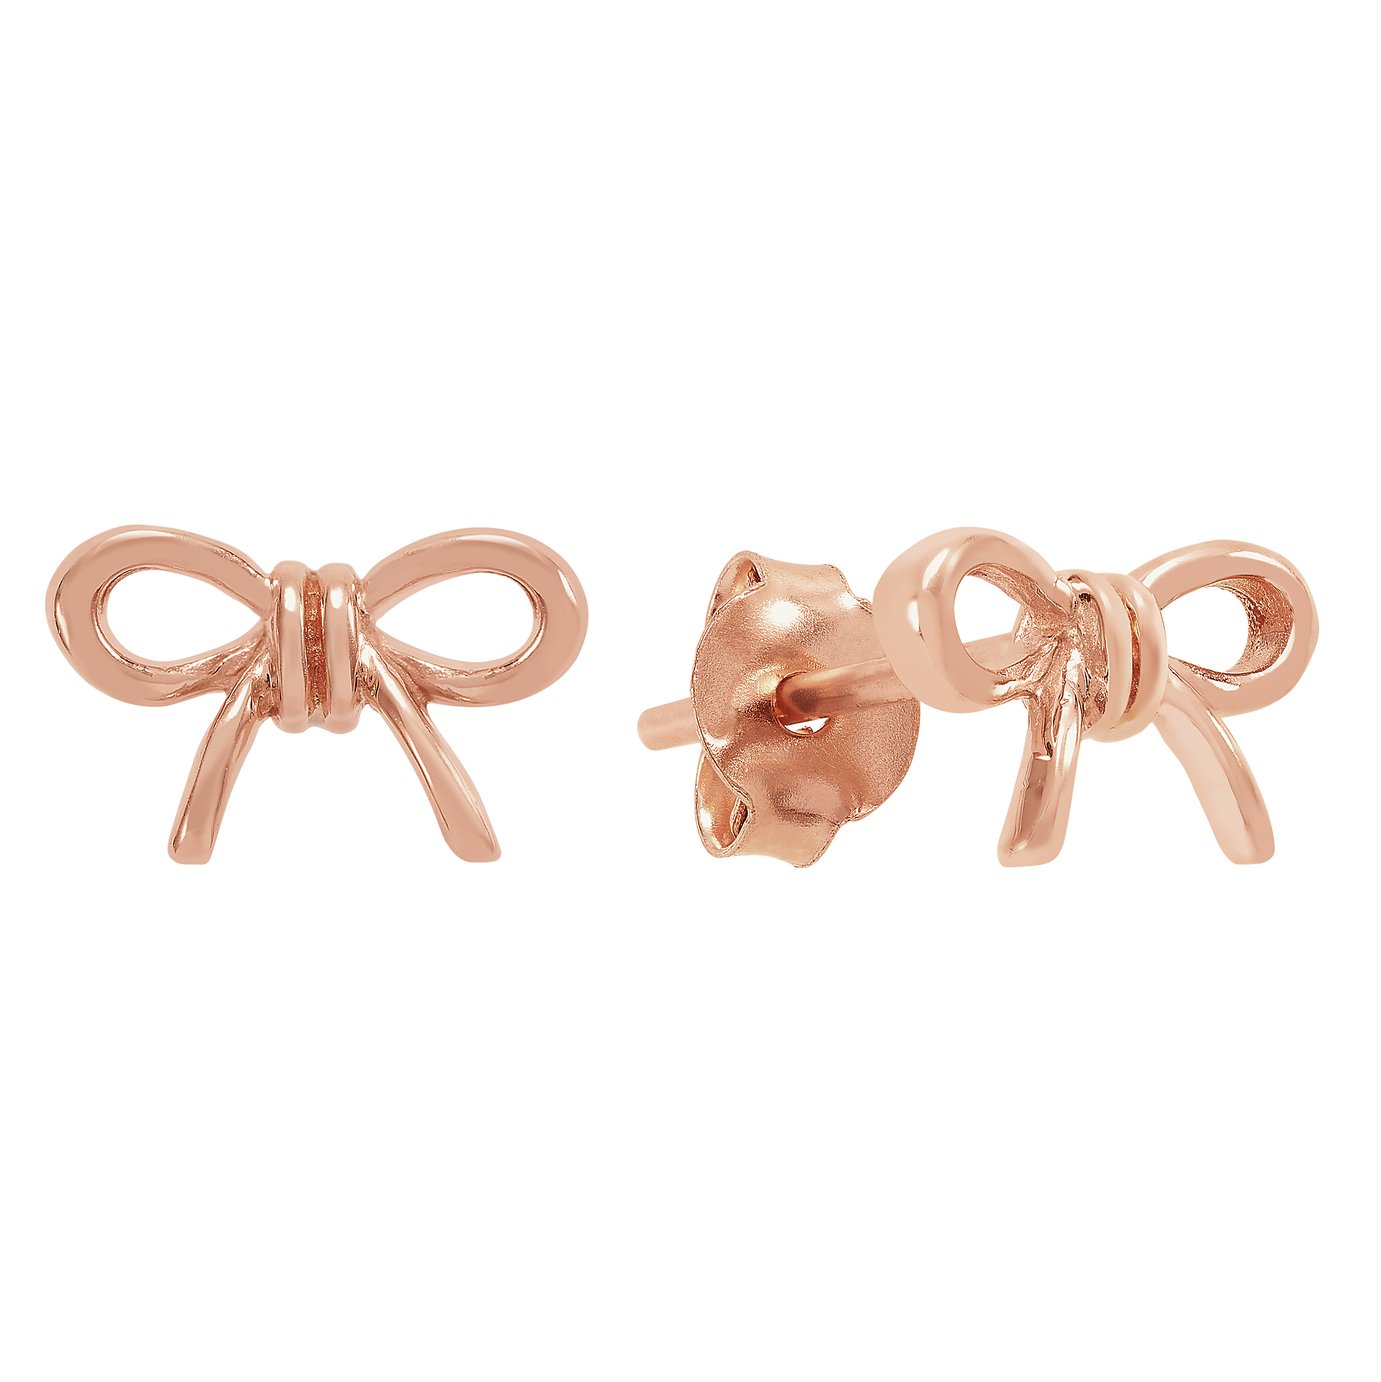 Revere 9ct Rose Gold Plated Sterling Silver Bow Earrings Review